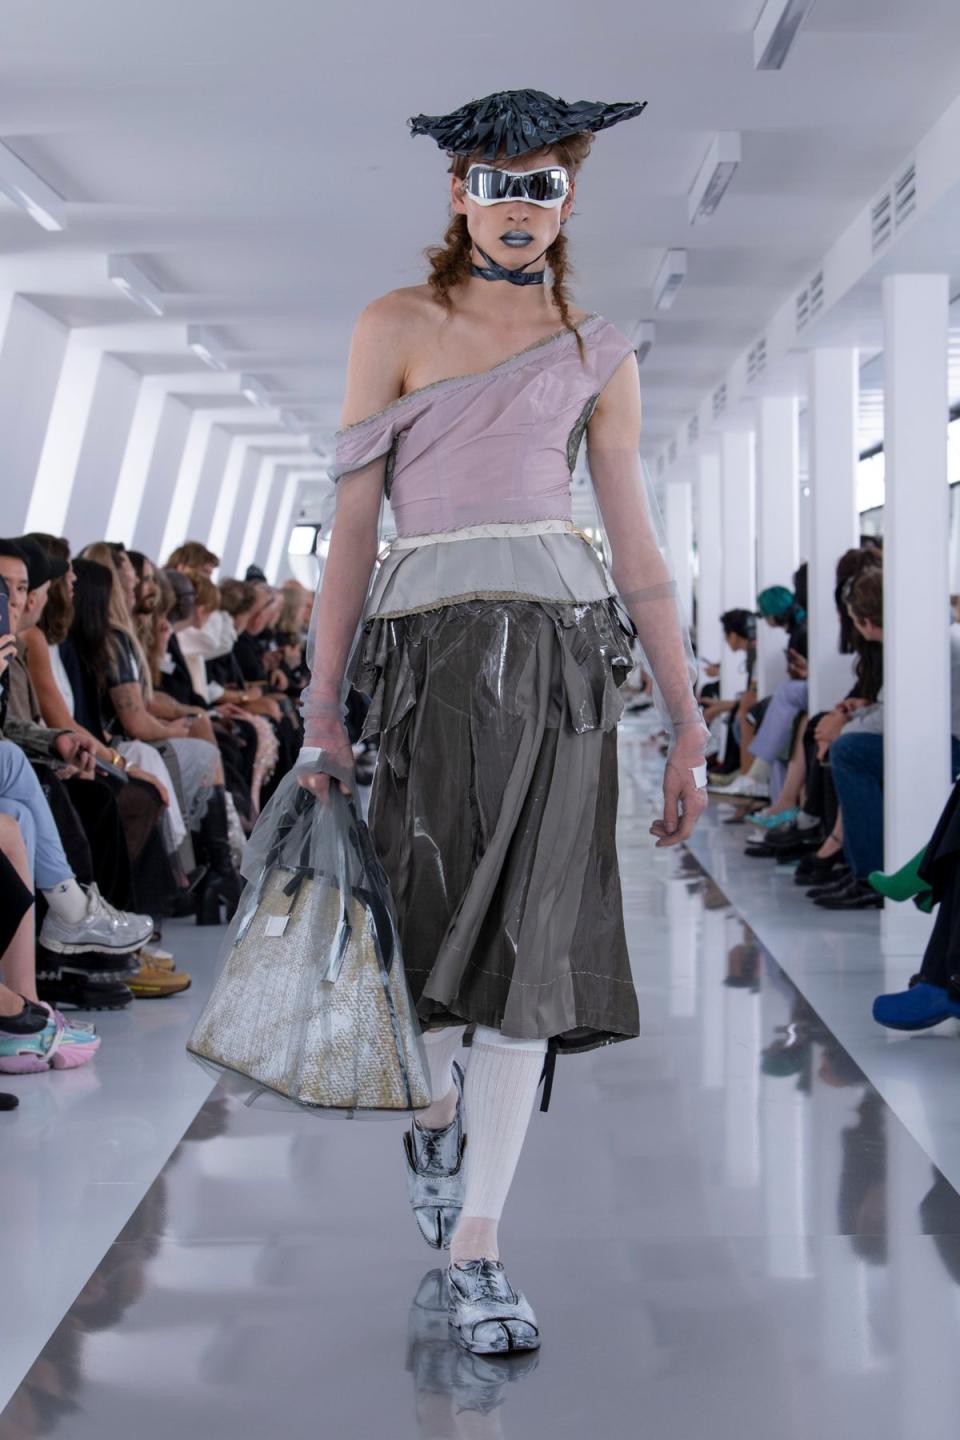 Maison Margiela proves a power pout doesn't have to be red (Margiela)